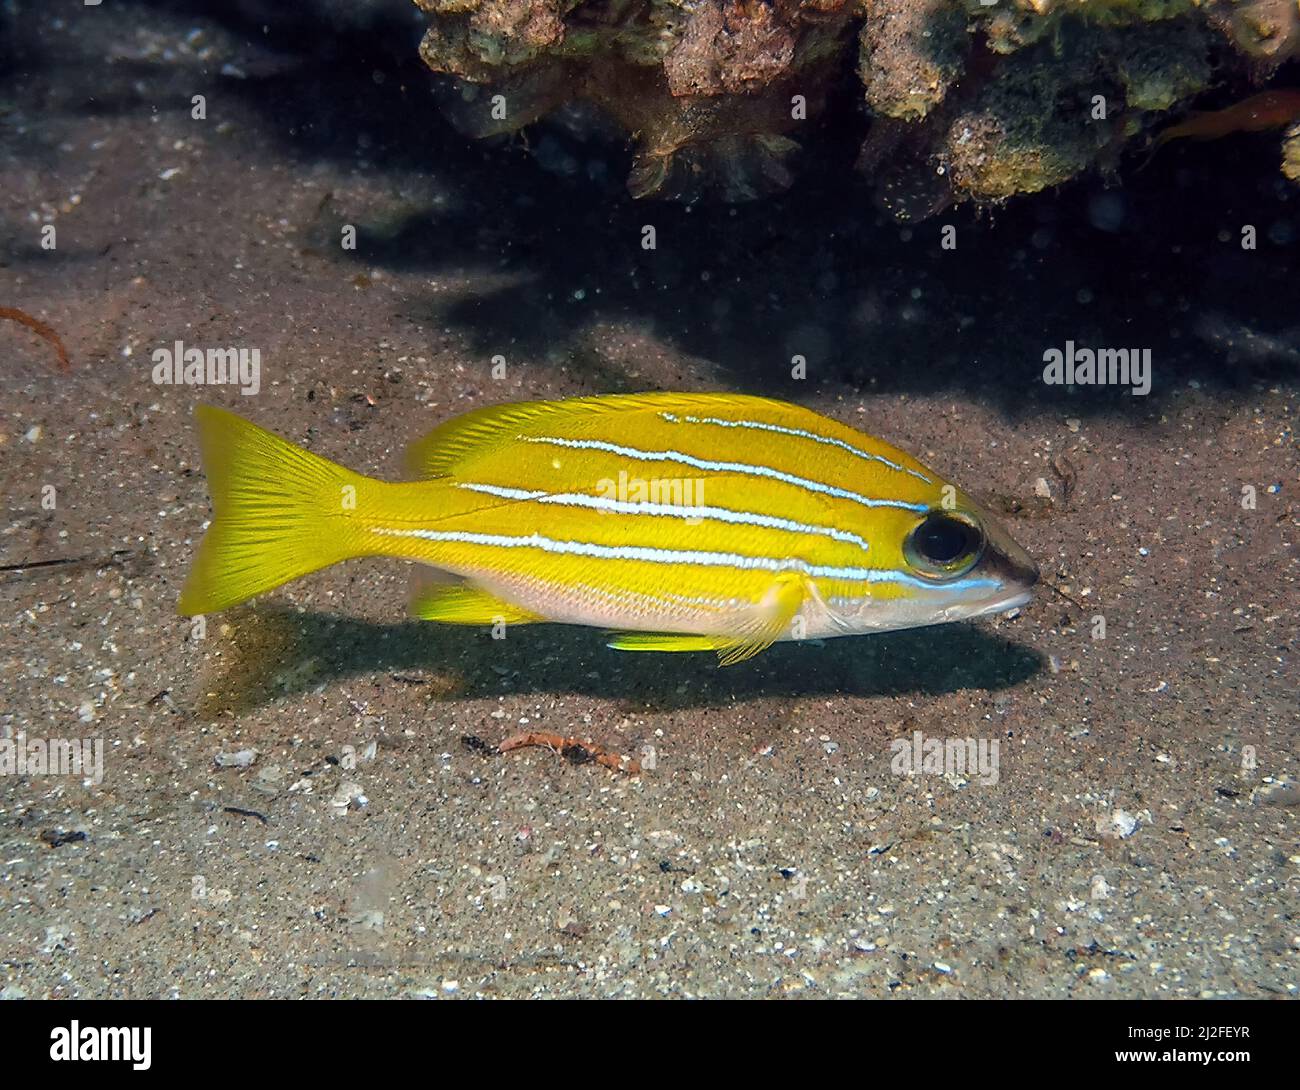 A Five-lined Snapper (Lutjanus quinquelineatus) in the Red Sea, Egypt Stock Photo